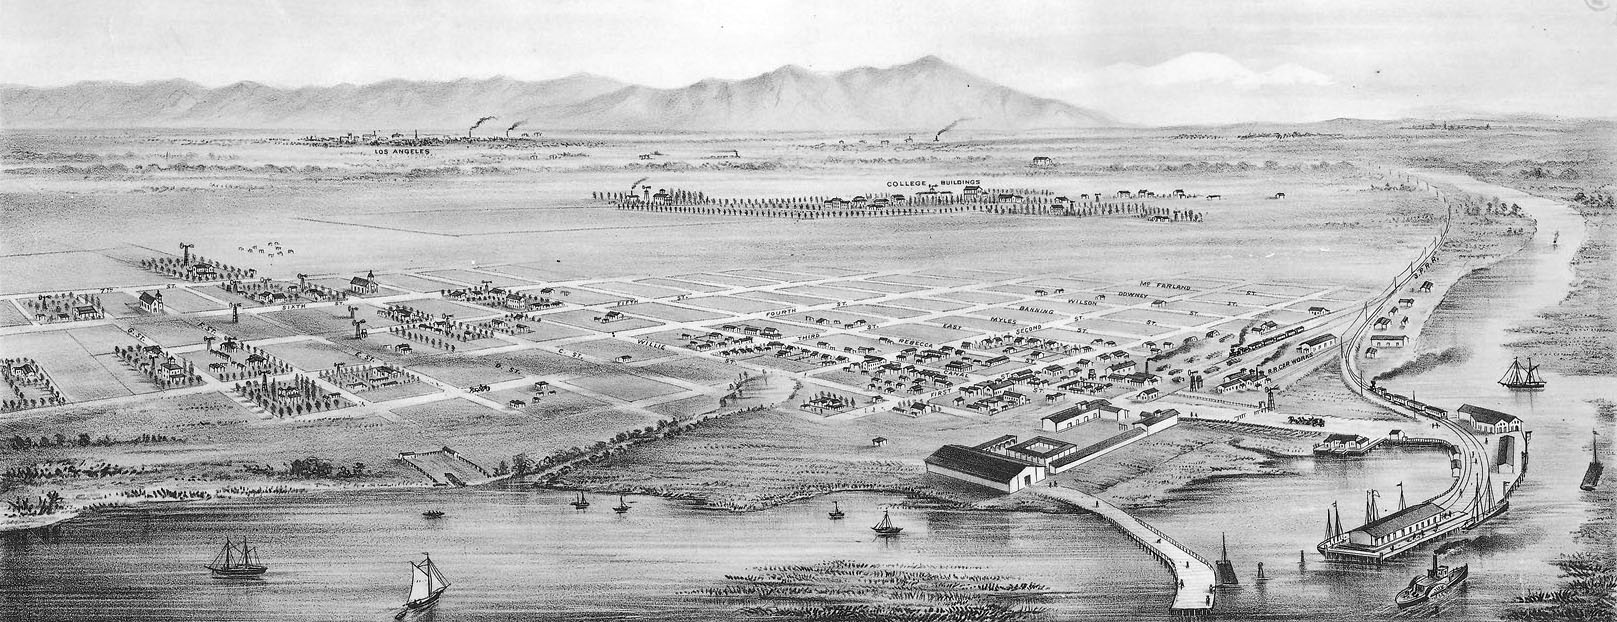 View of San Pedro Harbor and Wilmington 1877